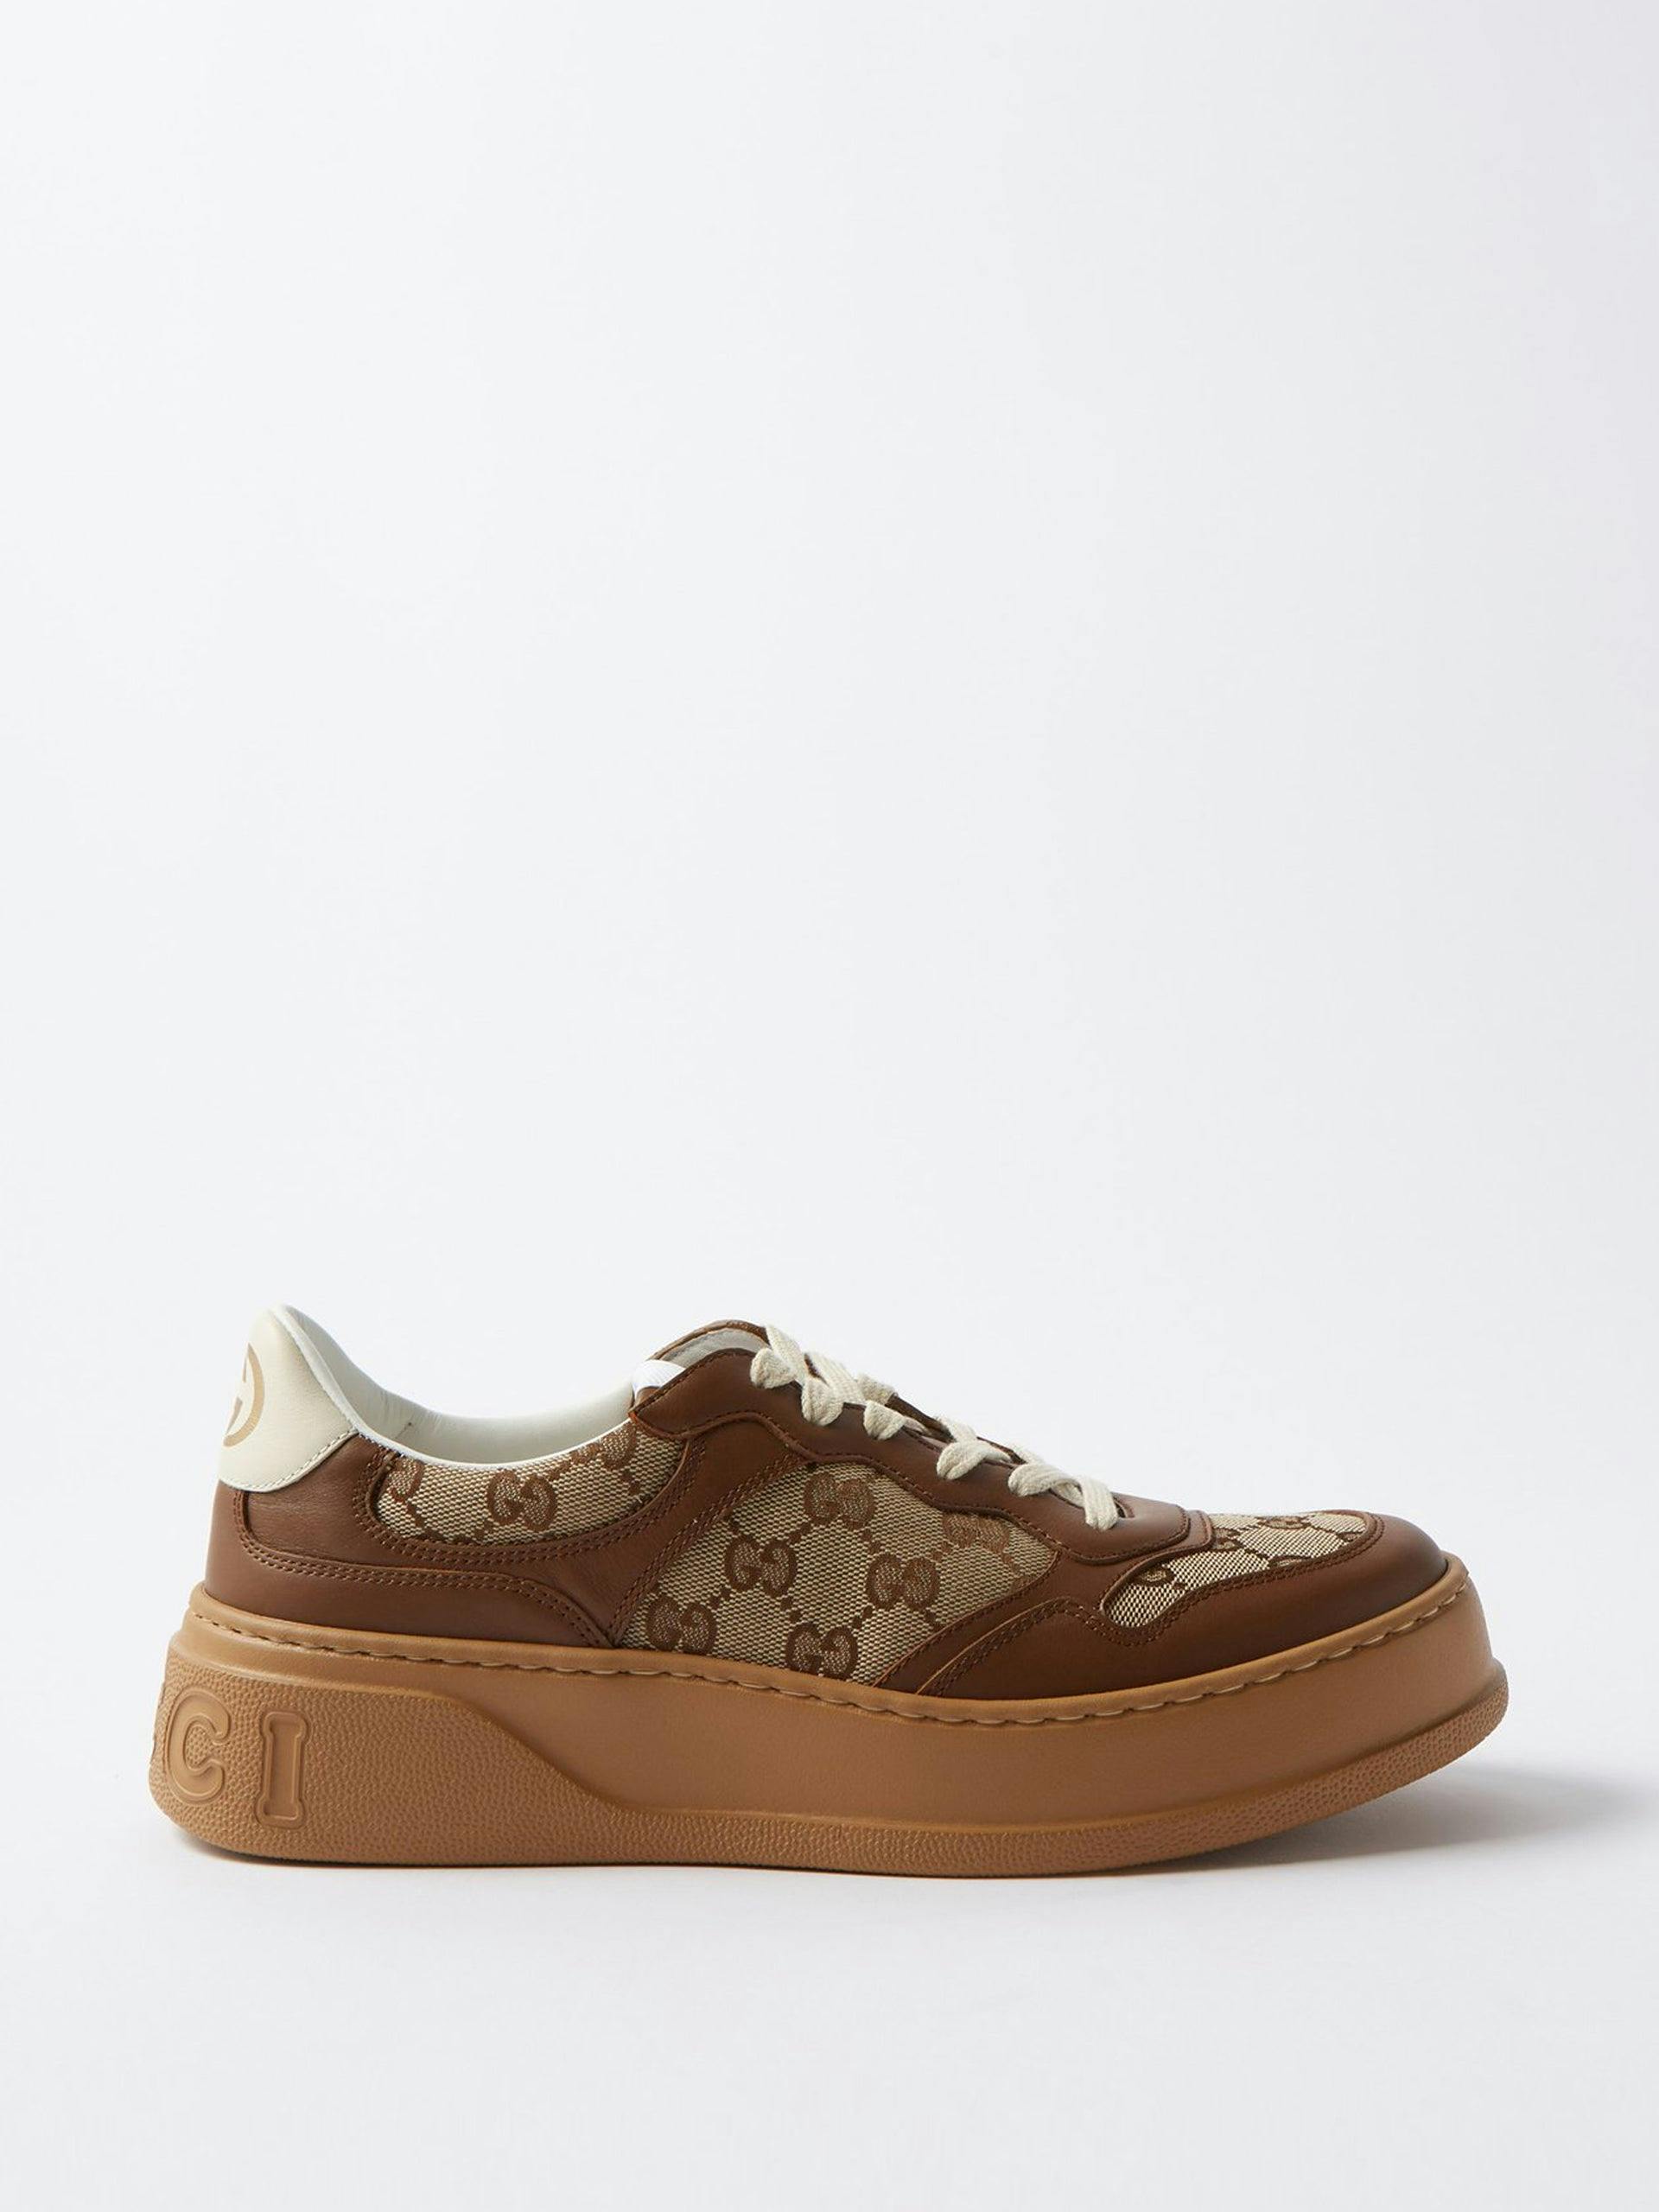 GG-jacquard canvas and leather trainers